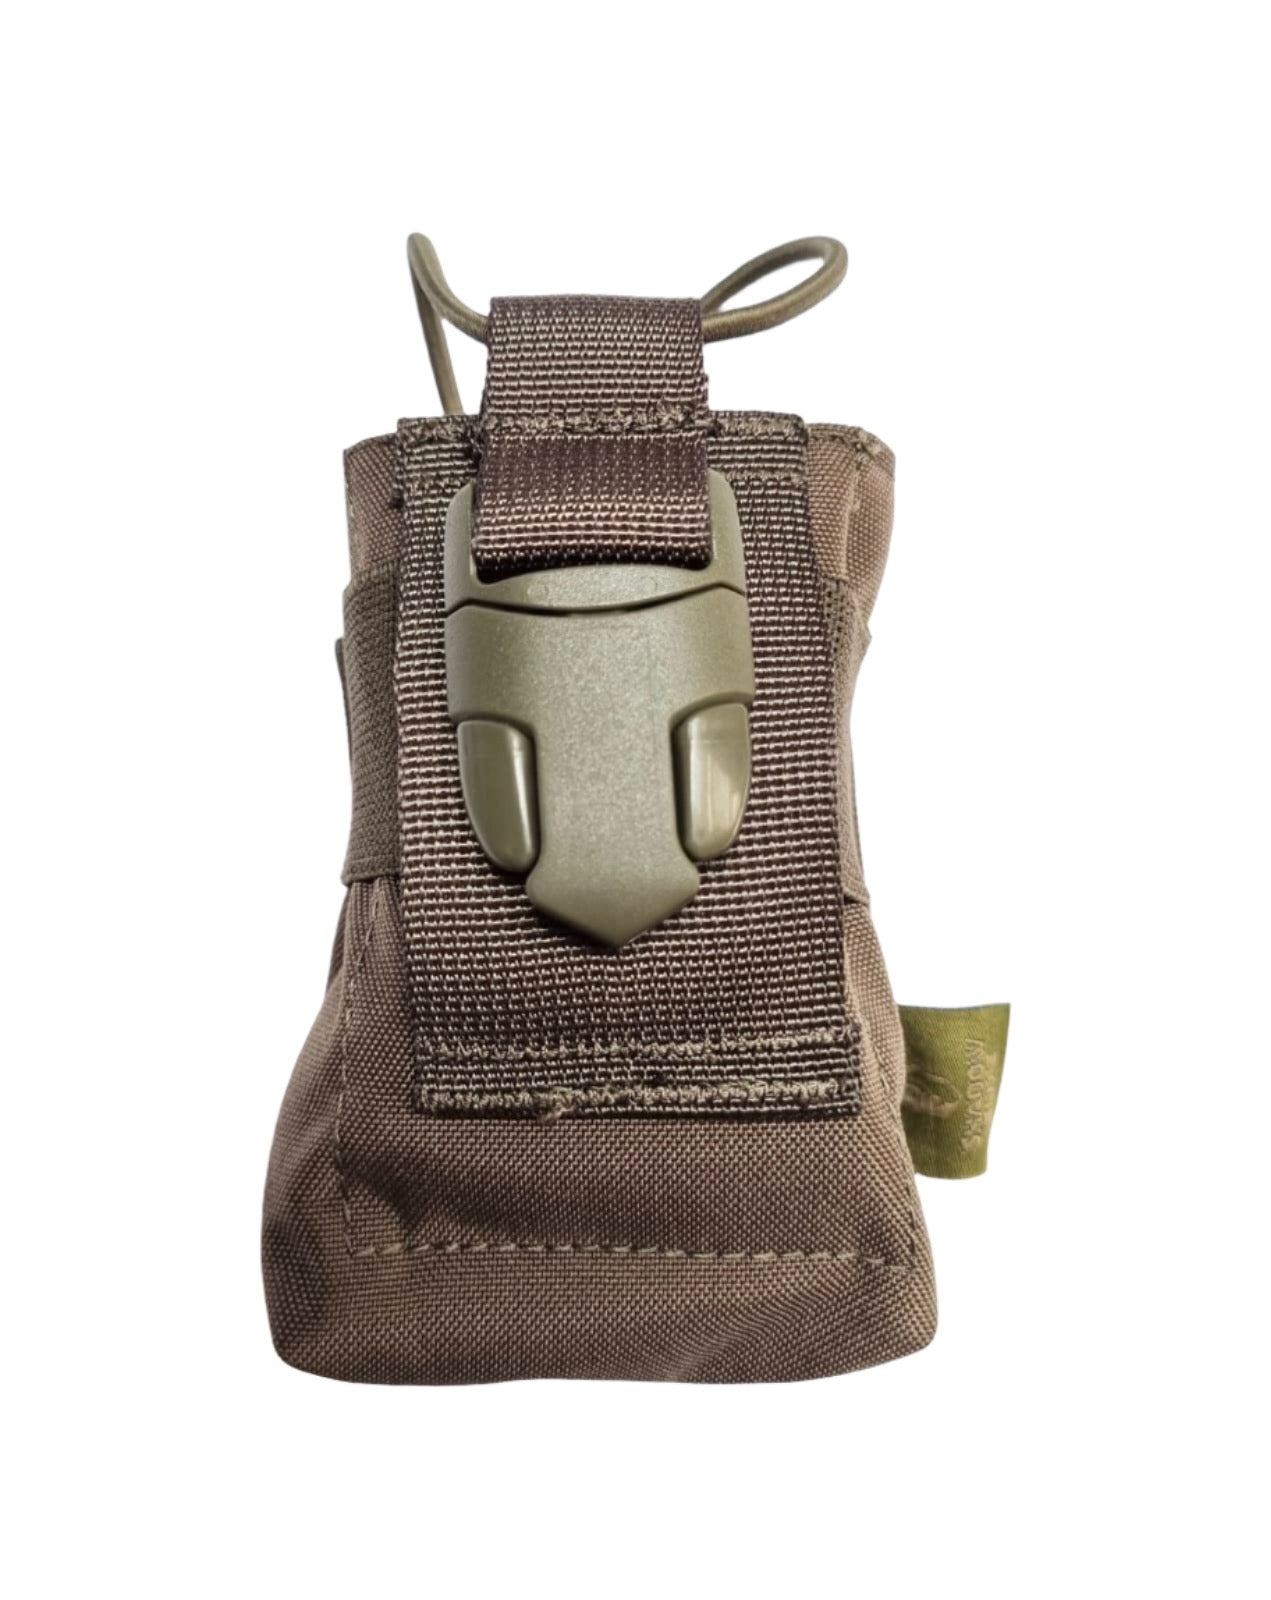 SHE-21090 "ARP" ADJUSTABLE RADIO POUCH ARMY GREEN